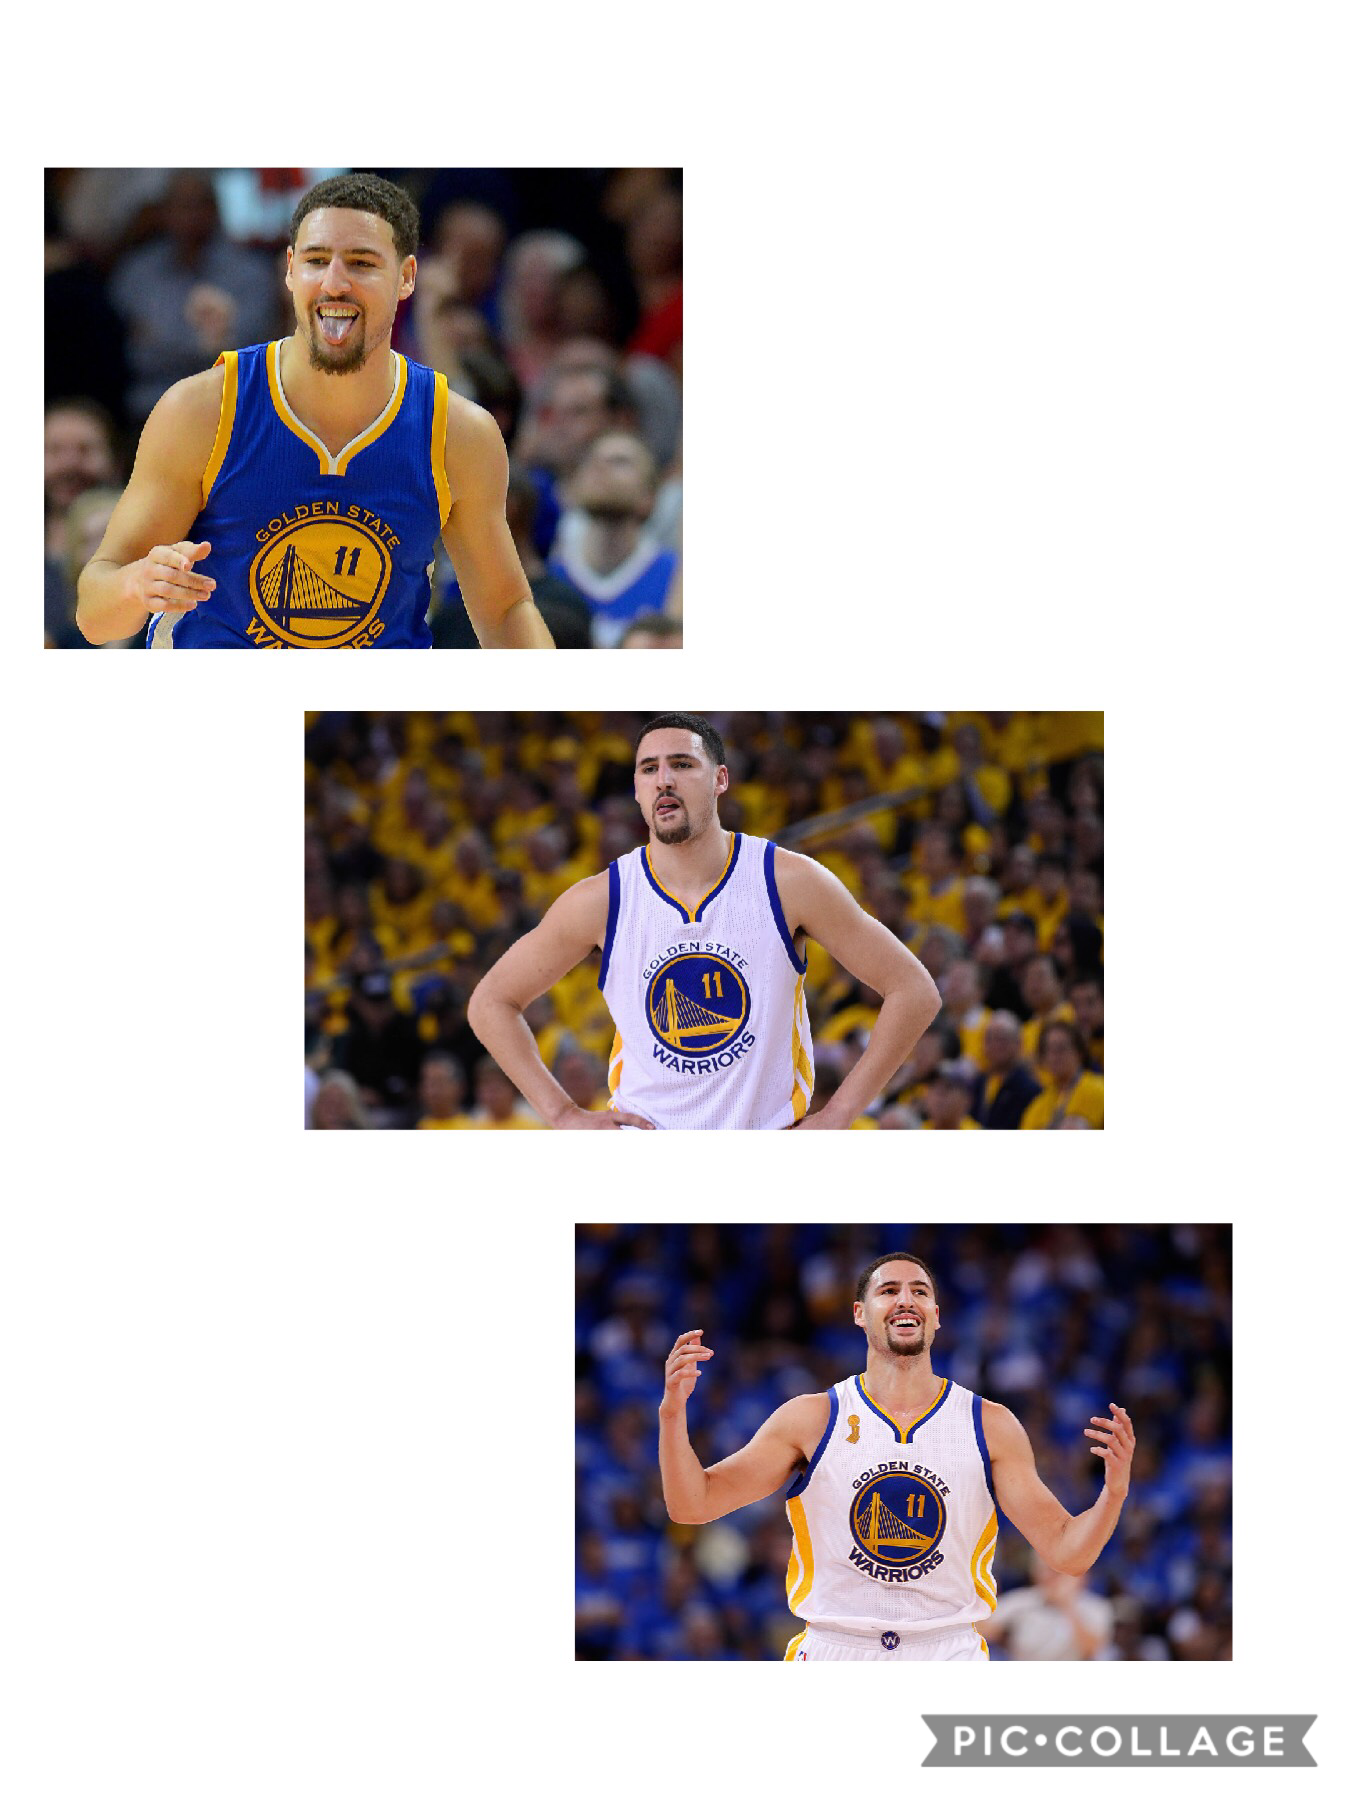 10 threes in a row for Klay last night. Insane!